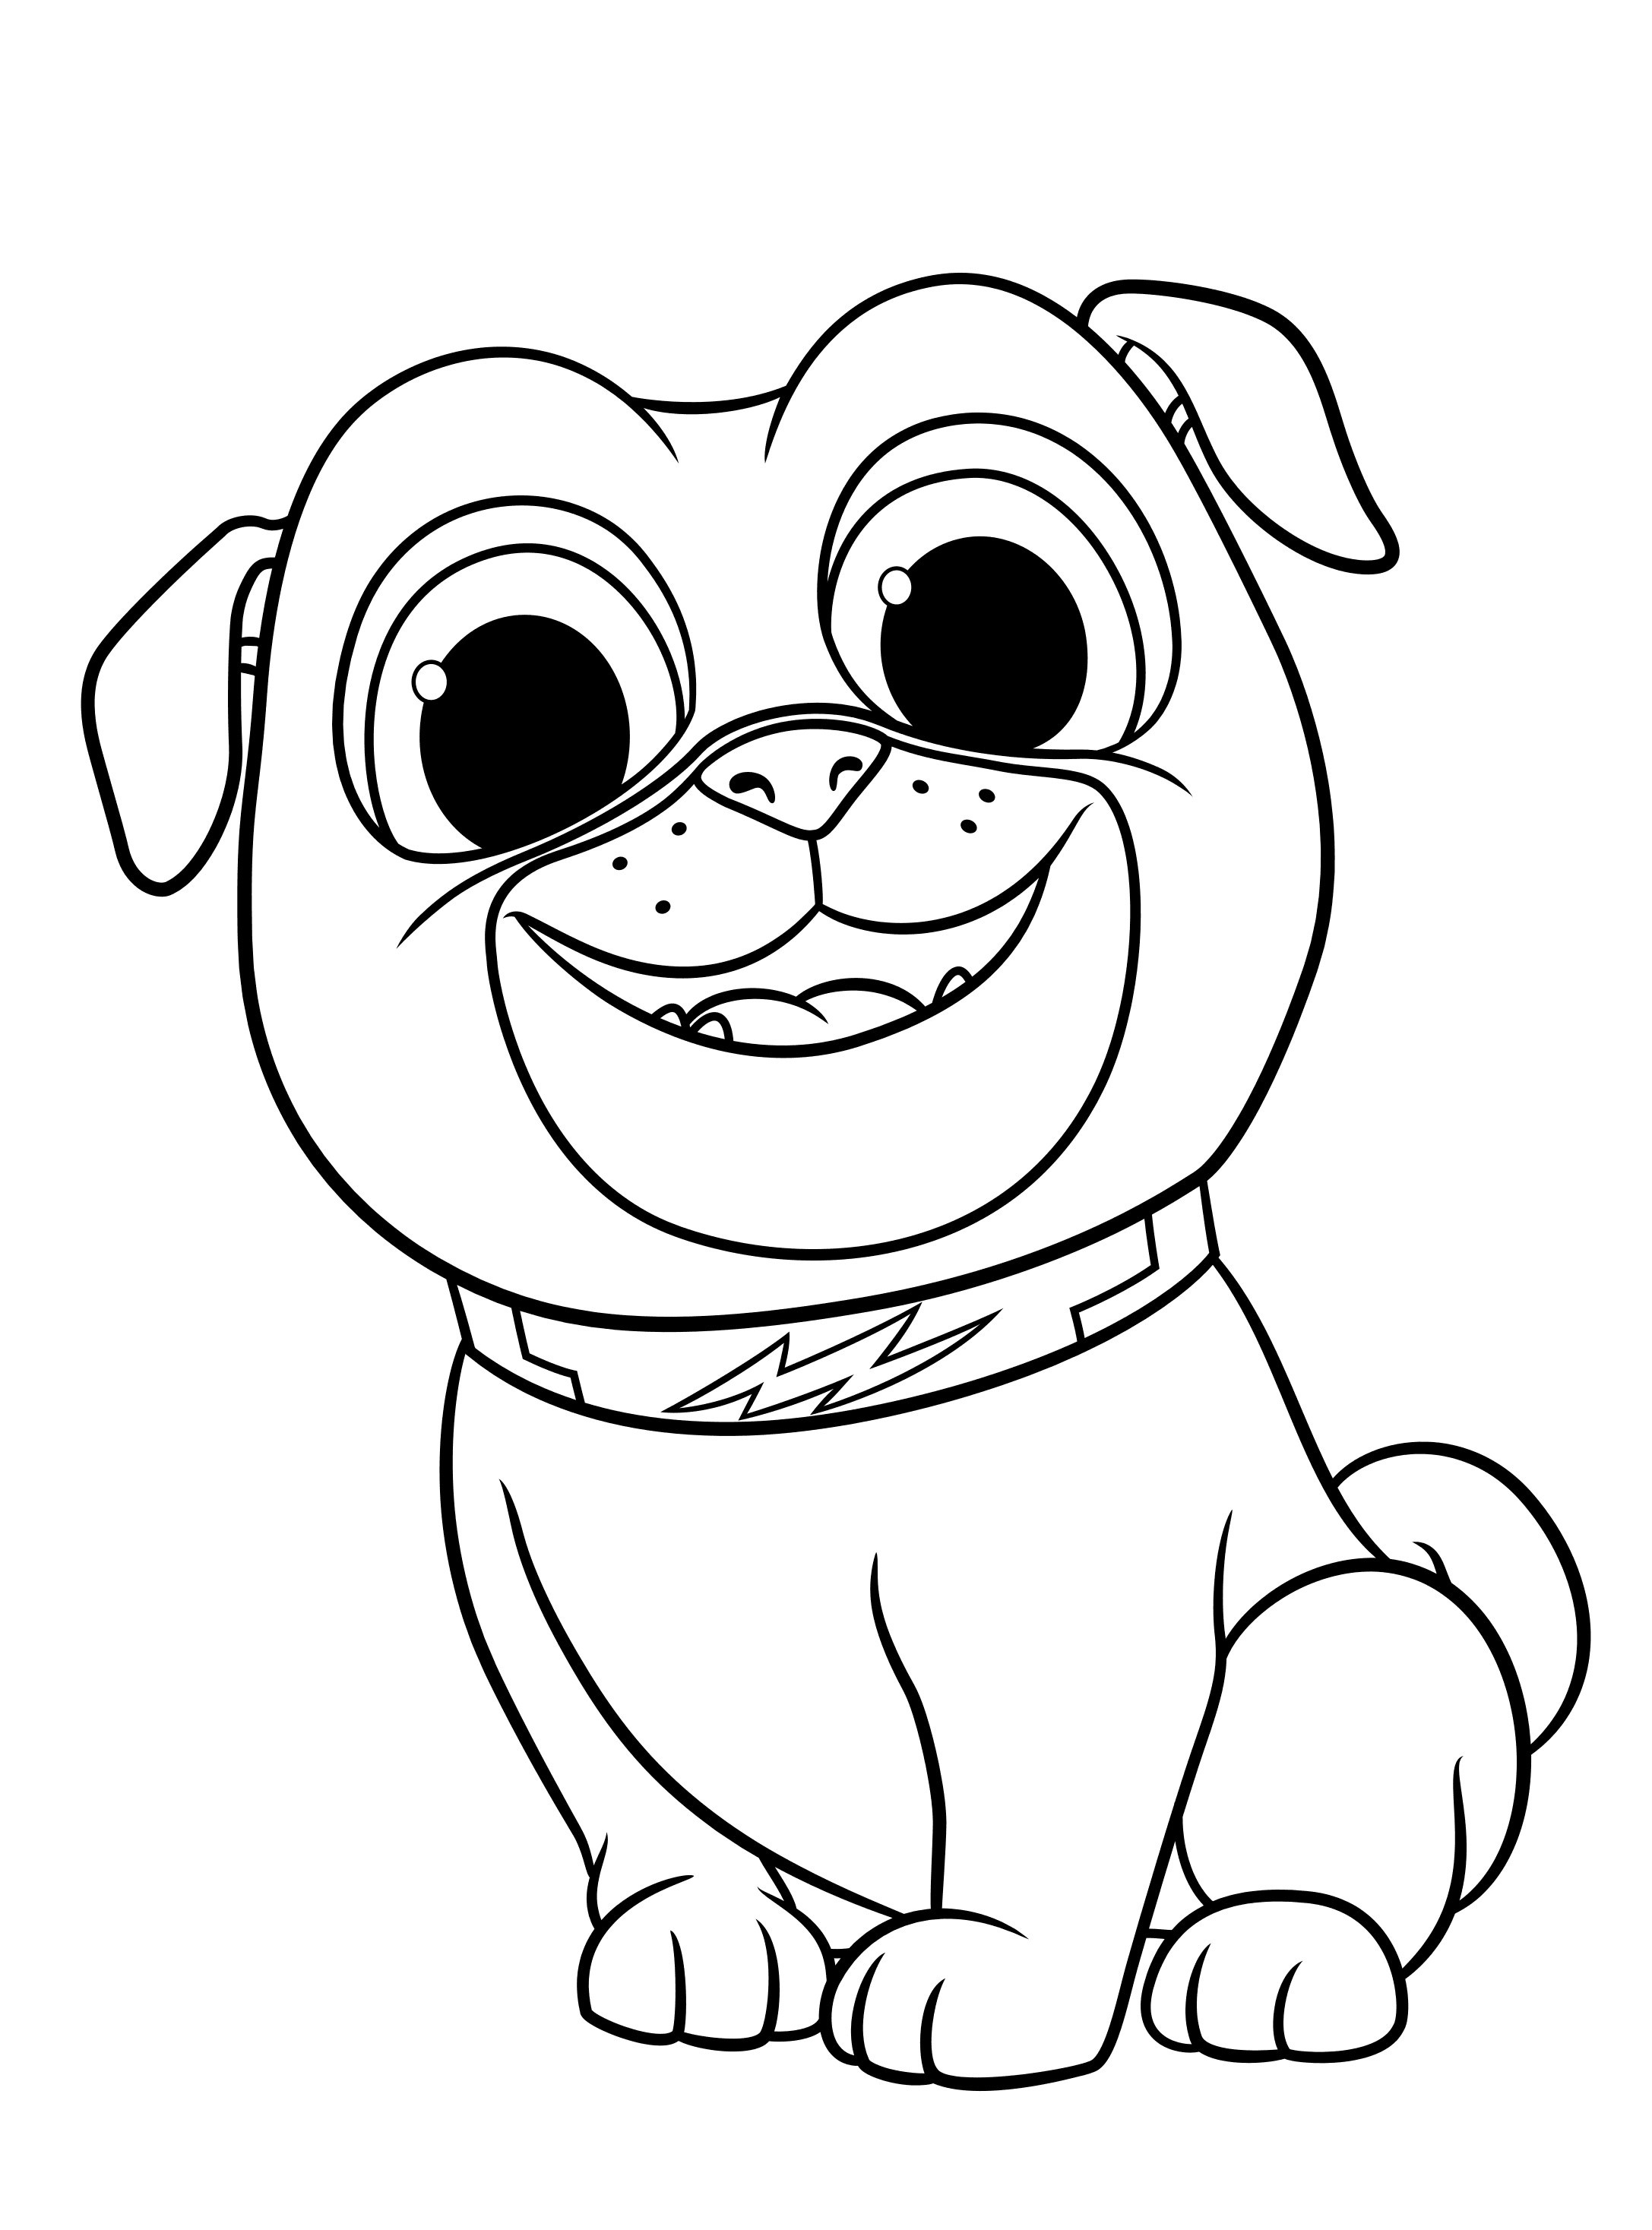 puppy-clifford-coloring-pages-at-getcolorings-free-printable-colorings-pages-to-print-and